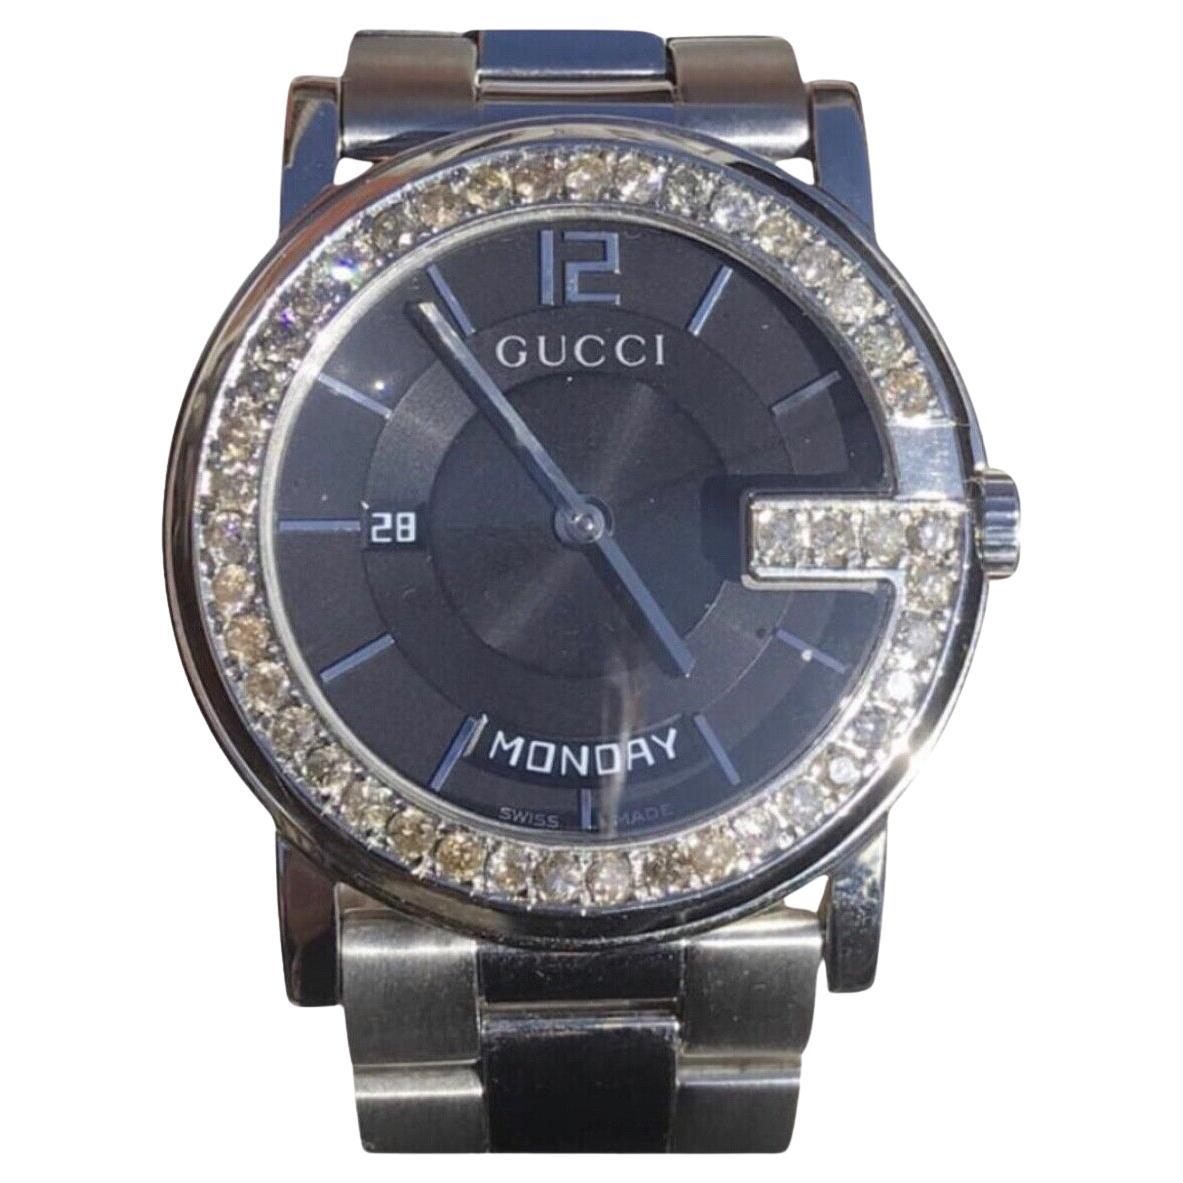  Custom 3 Carat Ct Diamond Gucci G Day Date Swiss Made Black-dial Watch 1 For Sale